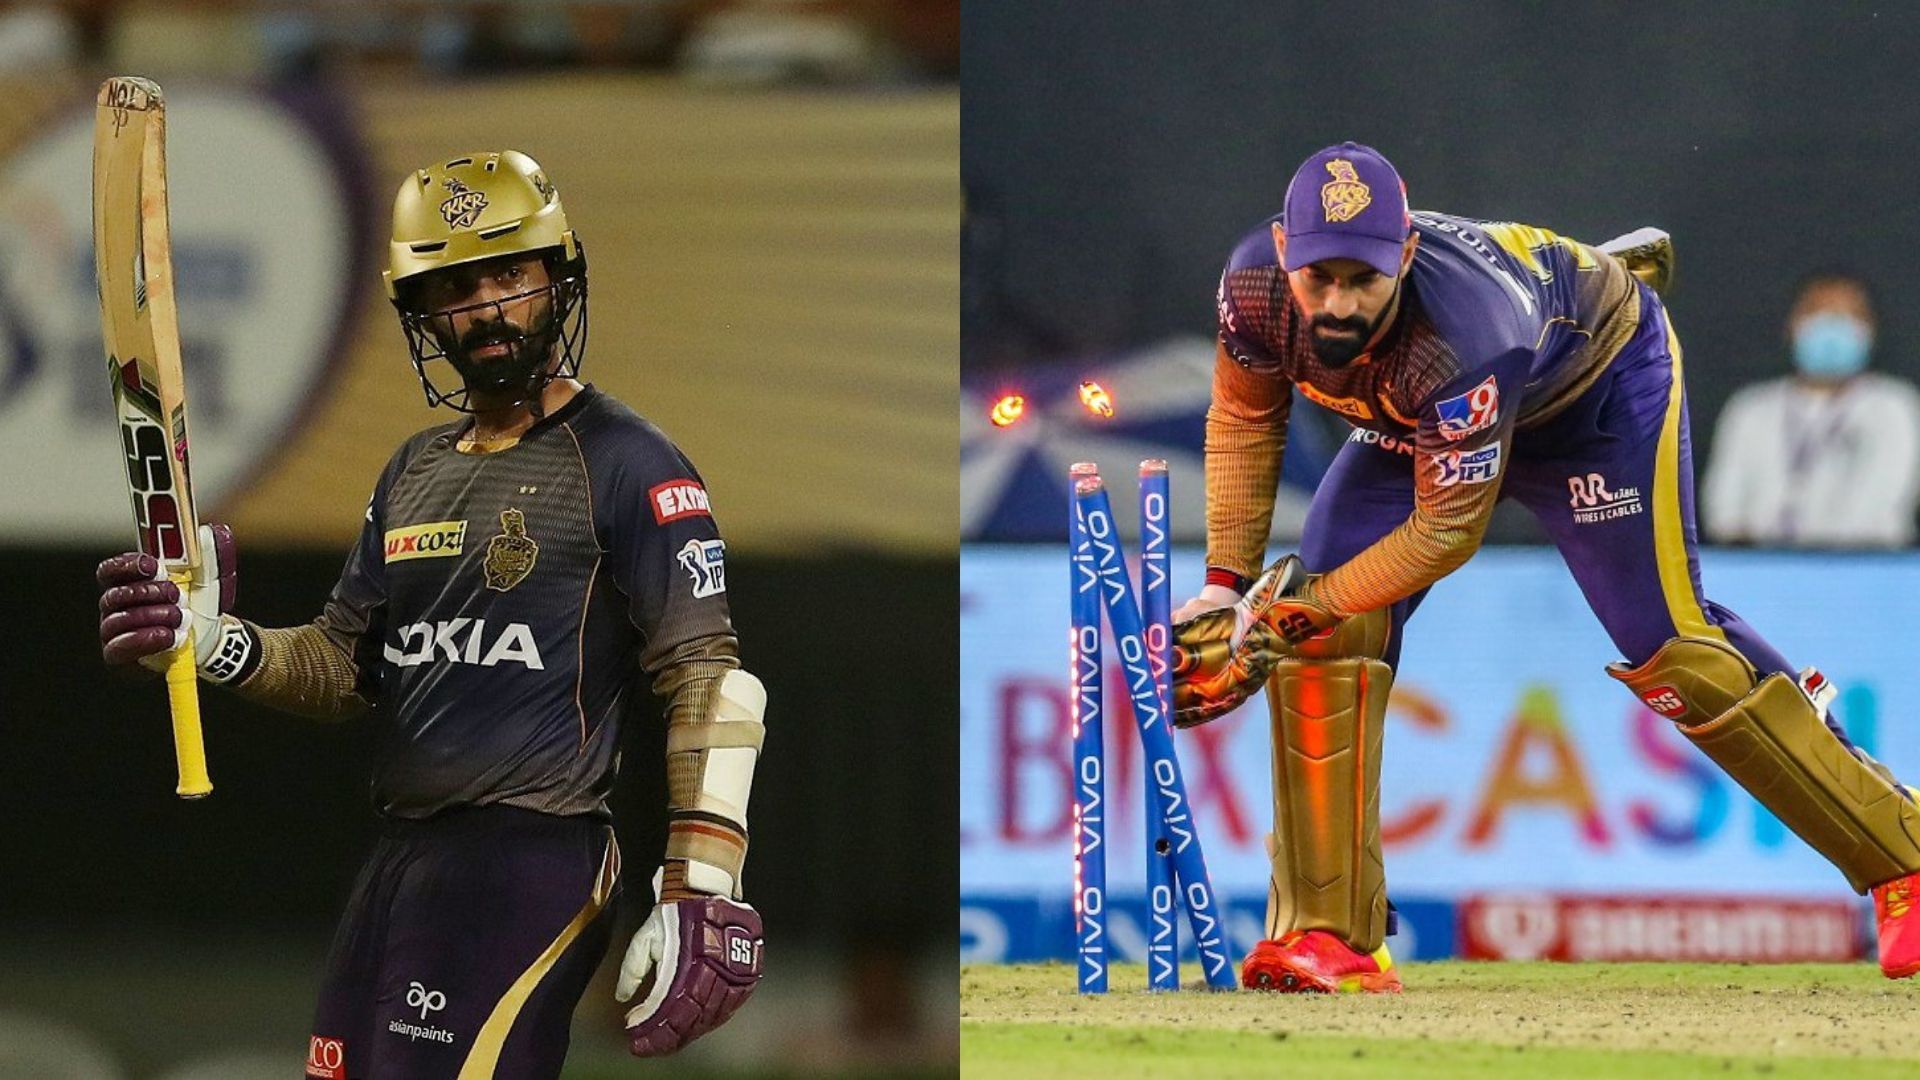 Dinesh Karthik is highly reliable both with the bat as well as behind the stumps